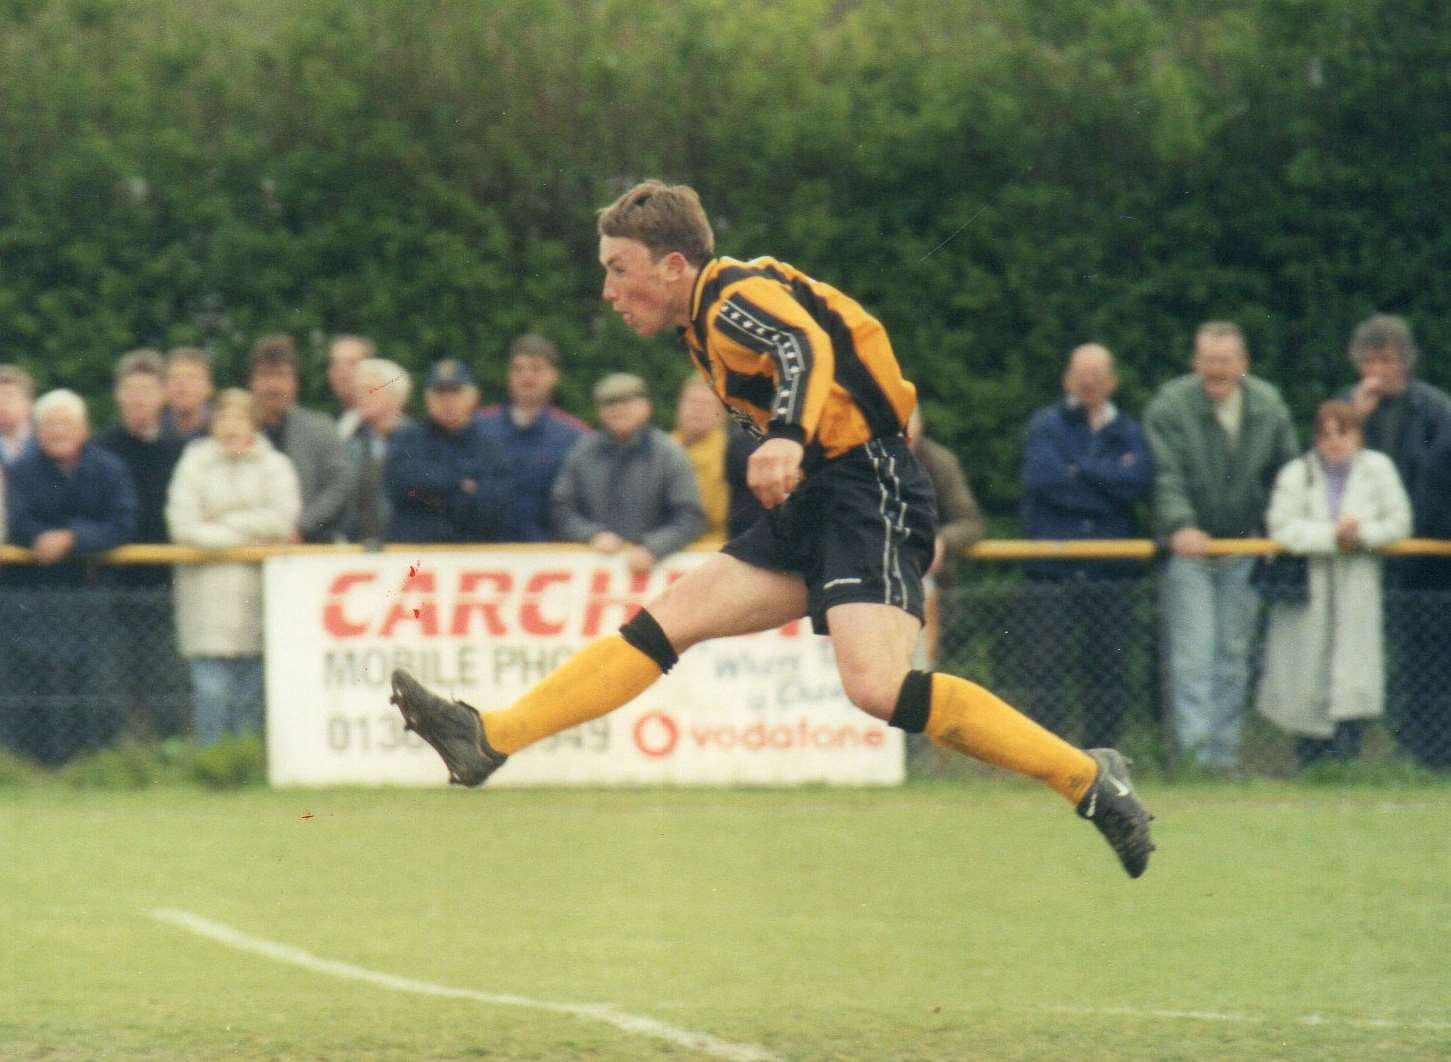 Jimmy Dryden is Folkestone Invicta's all-time leading scorer with 141 goals